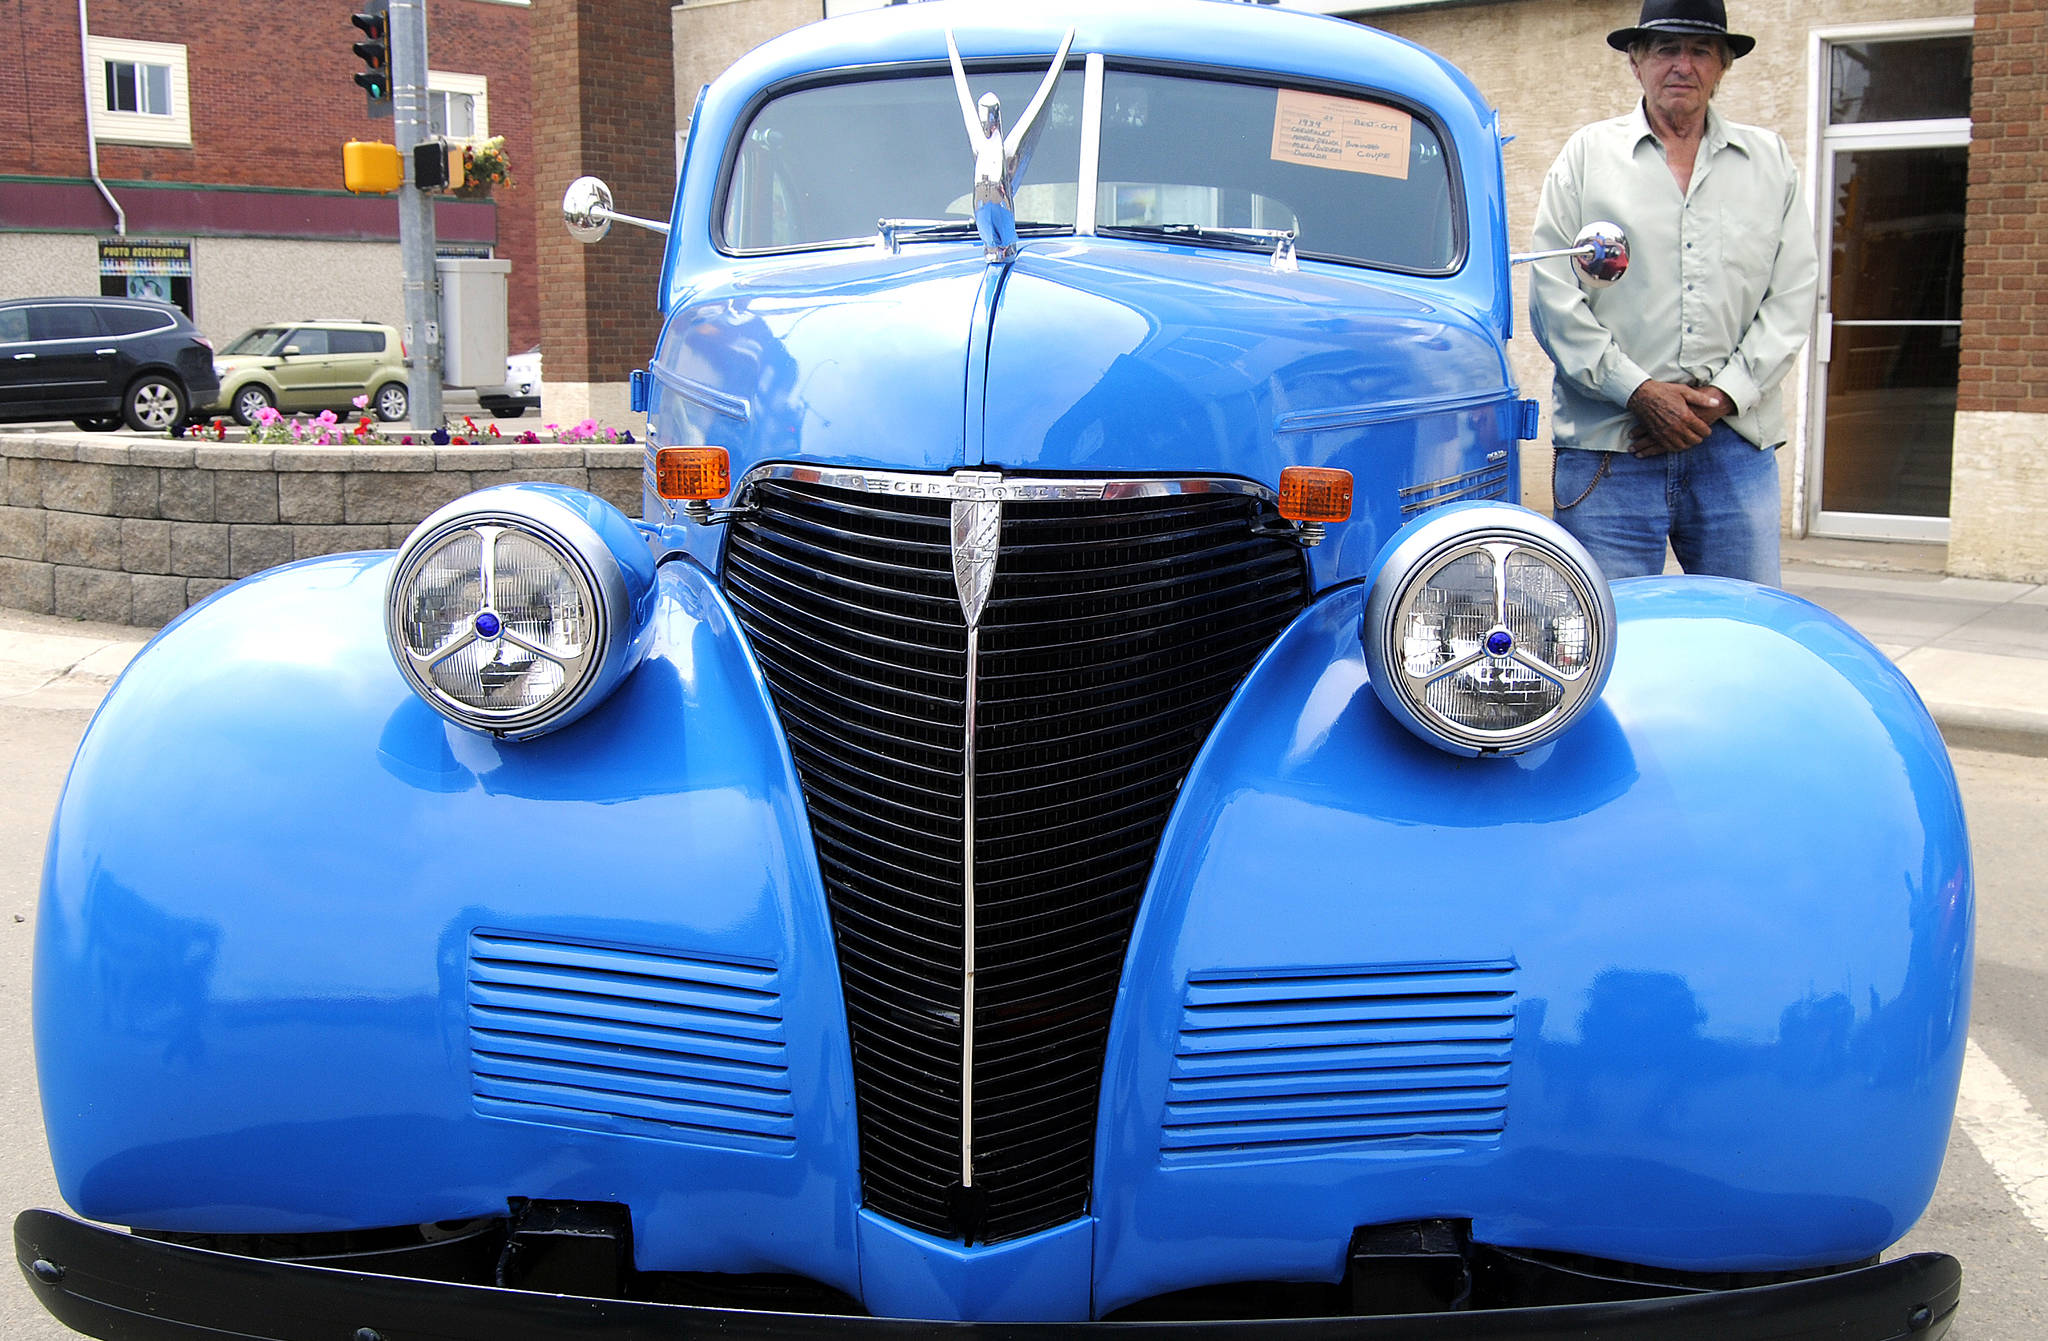 A rare 1939 Chev Master Delux owned by Mel Andres of Donalda took two awards (Best GM and Peoples’ Choice/Loyd Smith Memorial) during Stettler’s Show ‘N’ Shine and Cruise June 9 on main street. The event was put on by the Stettler Car Club. (Lisa Joy/Stettler Independent)